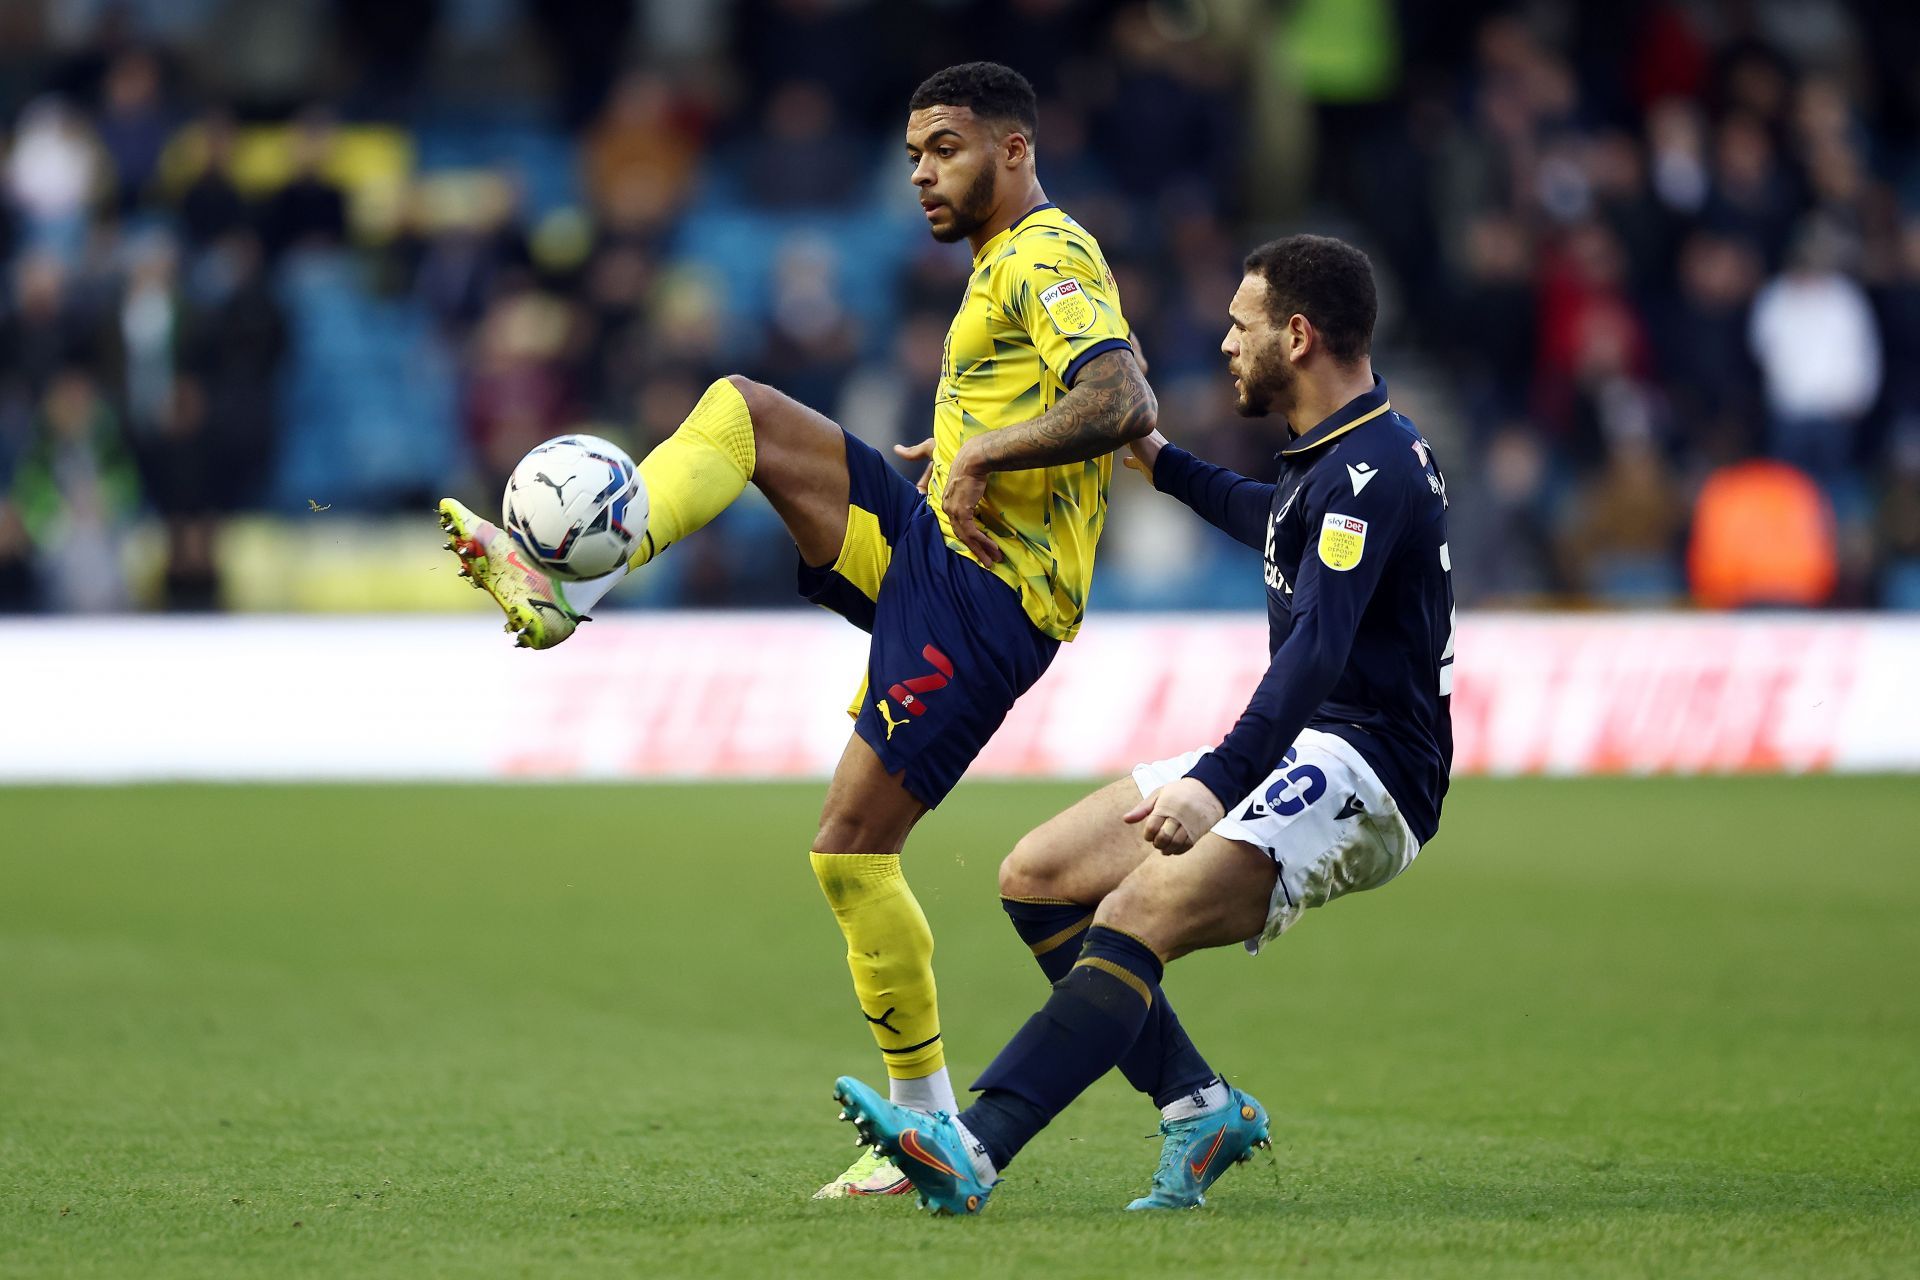 West Bromwich Albion play host to Blackburn Rovers on Monday